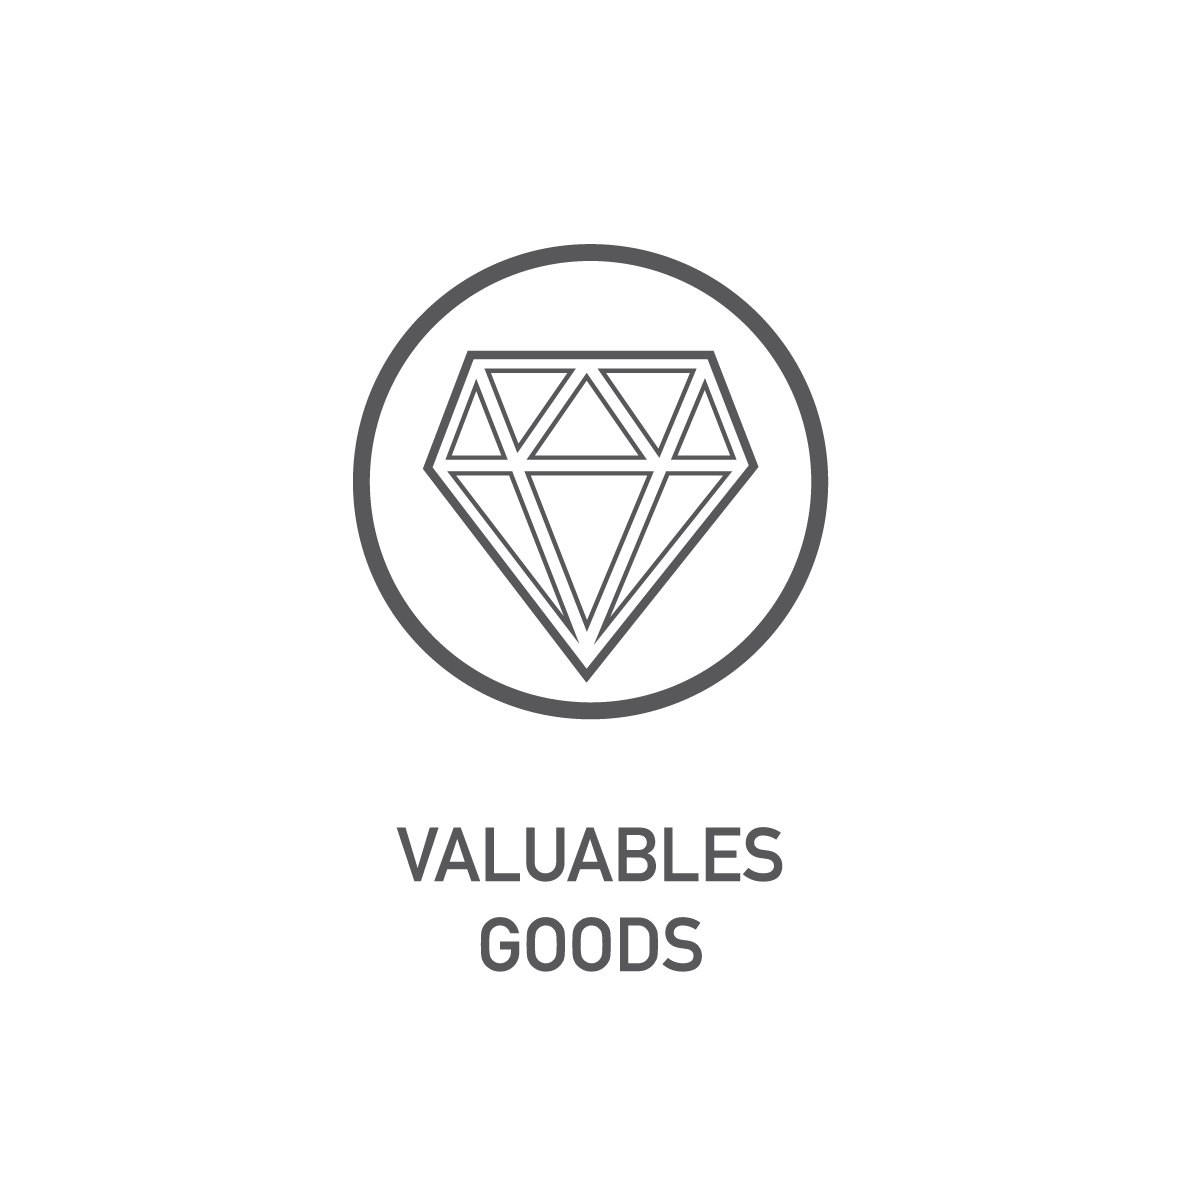 Valuable Goods